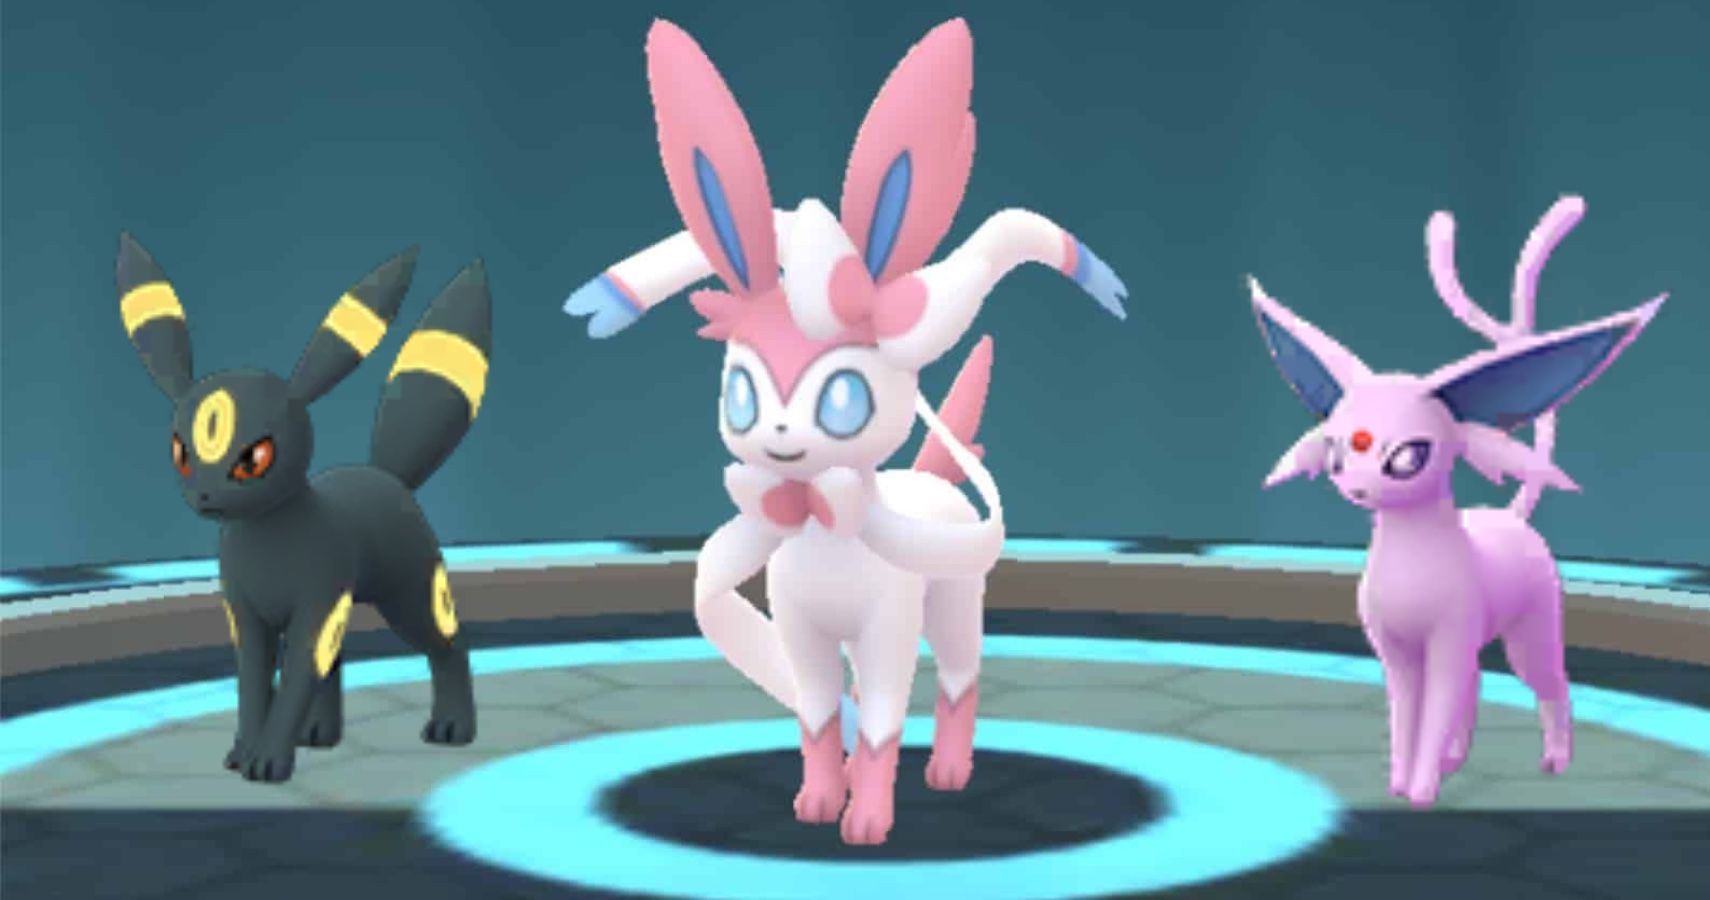 Want to make sure your Eevee evolves into Umbreon or Espeon in the